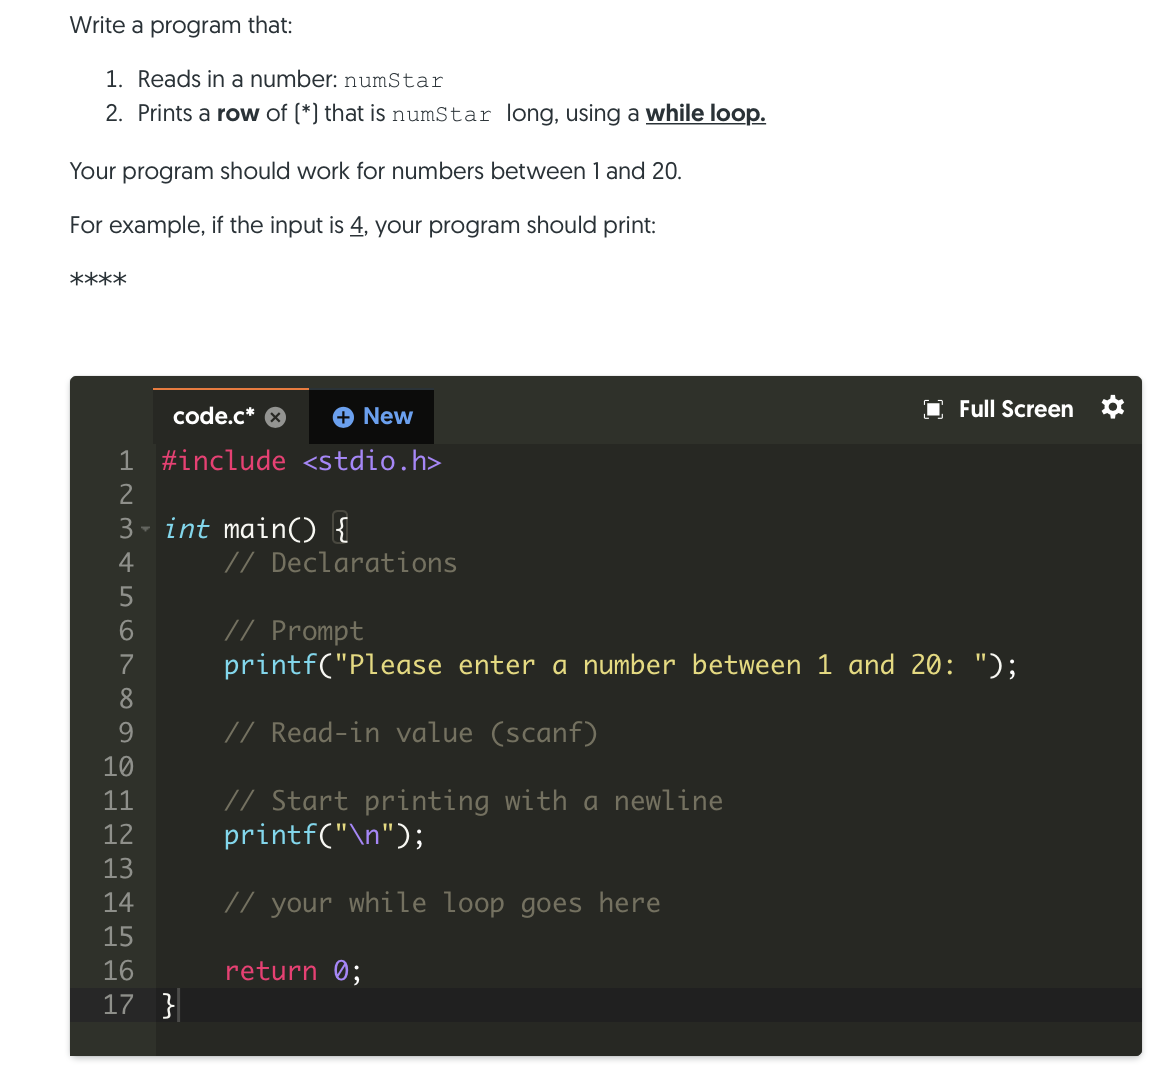 Write a program that:
1. Reads in a number: numStar
2. Prints a row of (*) that is numStar long, using a while loop.
Your program should work for numbers between 1 and 20.
For example, if the input is 4, your program should print:
****
code.c*
+ New
O Full Screen
1 #include <stdio.h>
3 - int main() {
// Declarations
4
// Prompt
printf("Please enter a number between 1 and 20: ");
7
8.
// Read-in value (scanf)
10
// Start printing with a newline
printf("\n");
11
12
13
14
// your while loop goes here
15
16
return 0;
17 }
